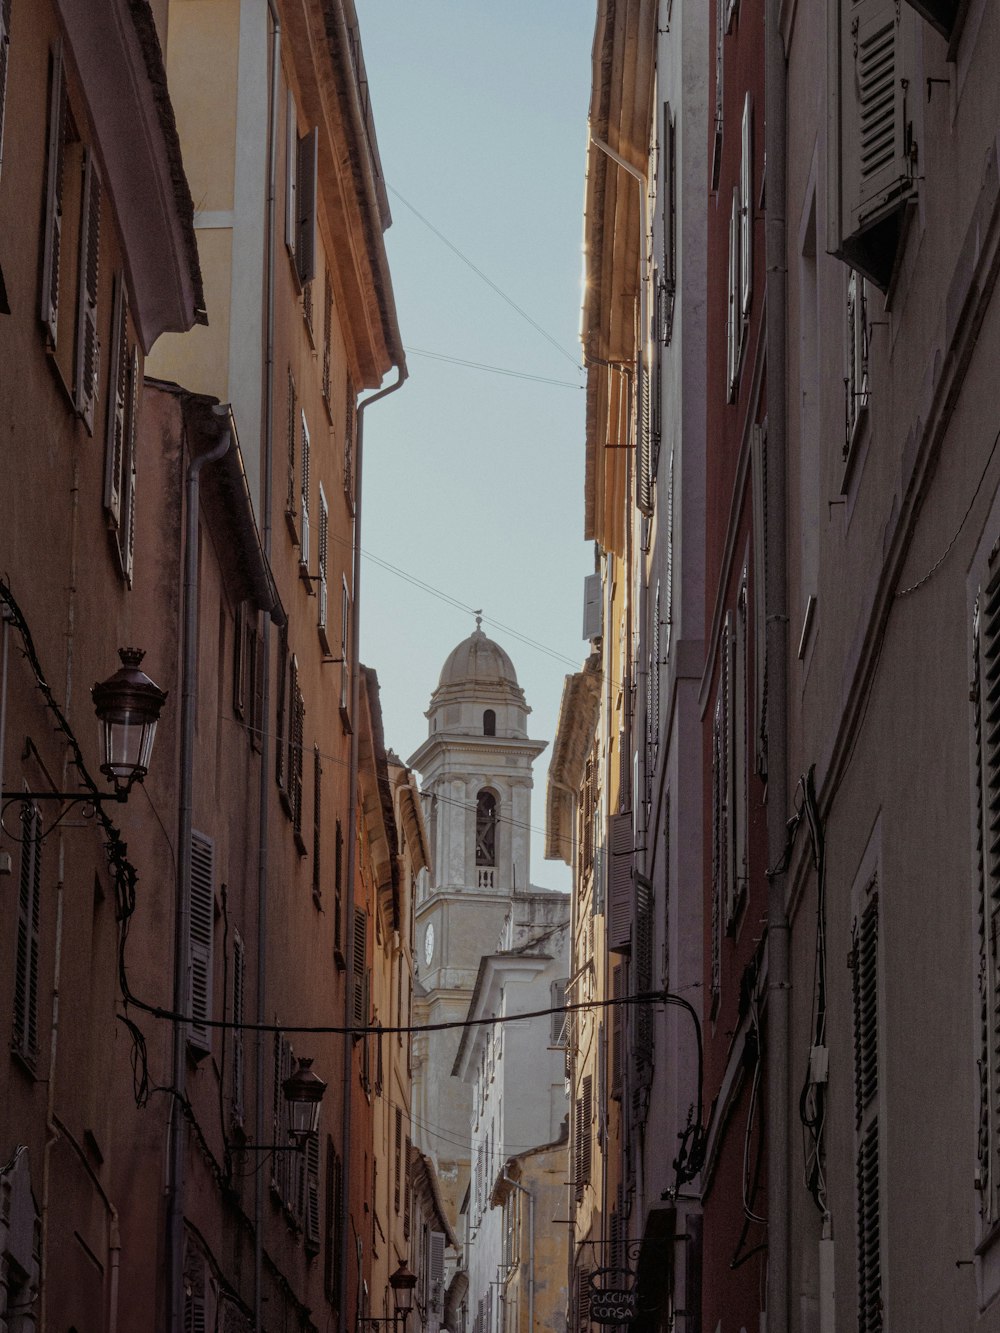 a narrow city street with a church steeple in the background